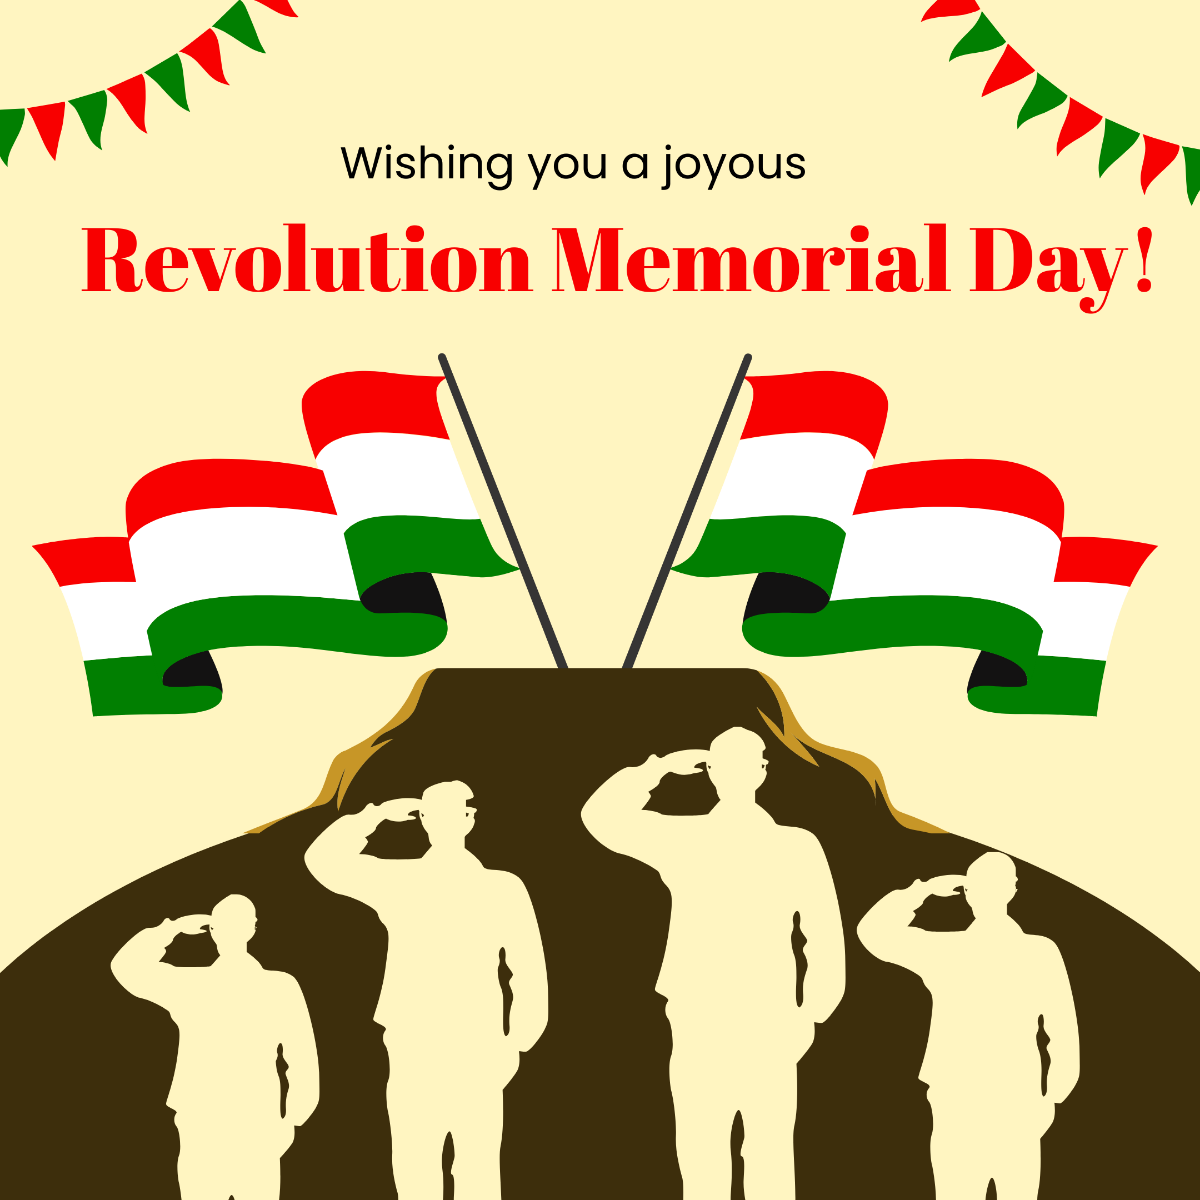 1848 Revolution Memorial Day Wishes Vector Template